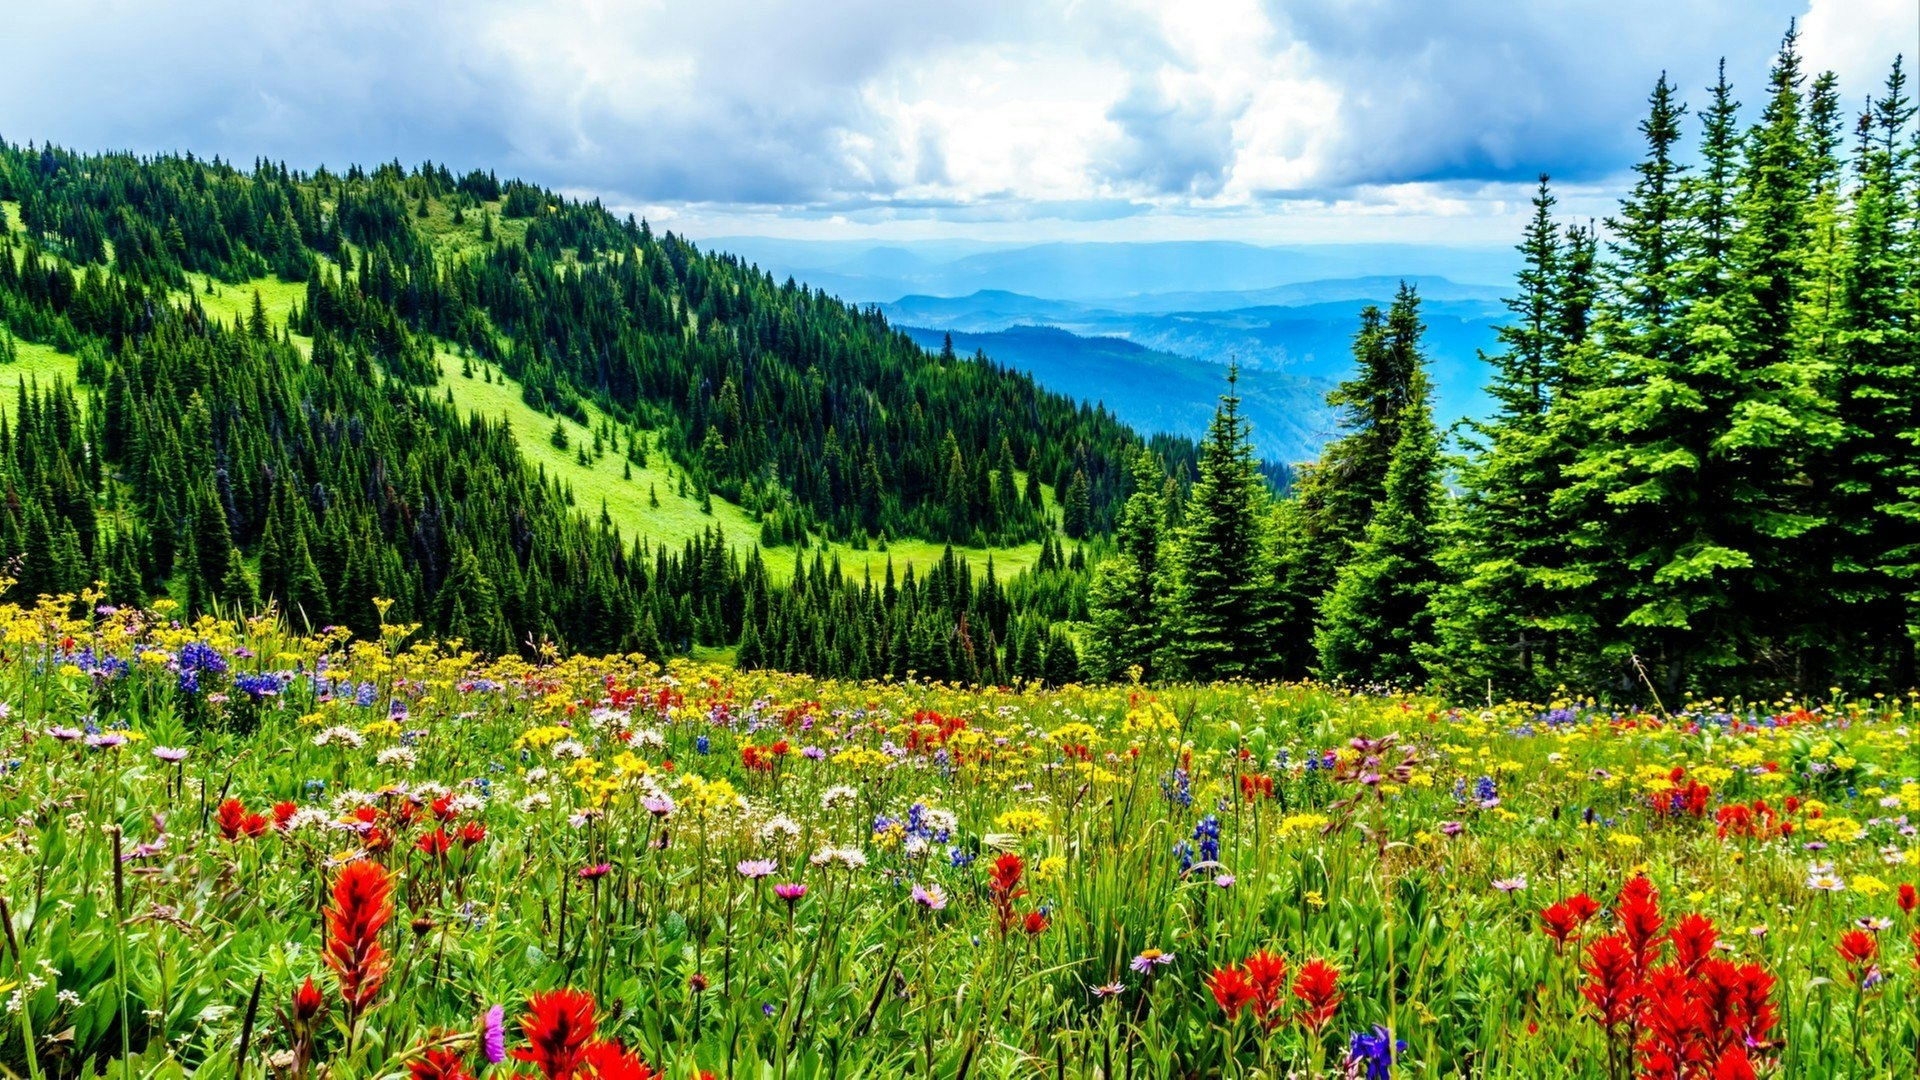 Hiking through the alpine meadows filled with abundant wildflowers